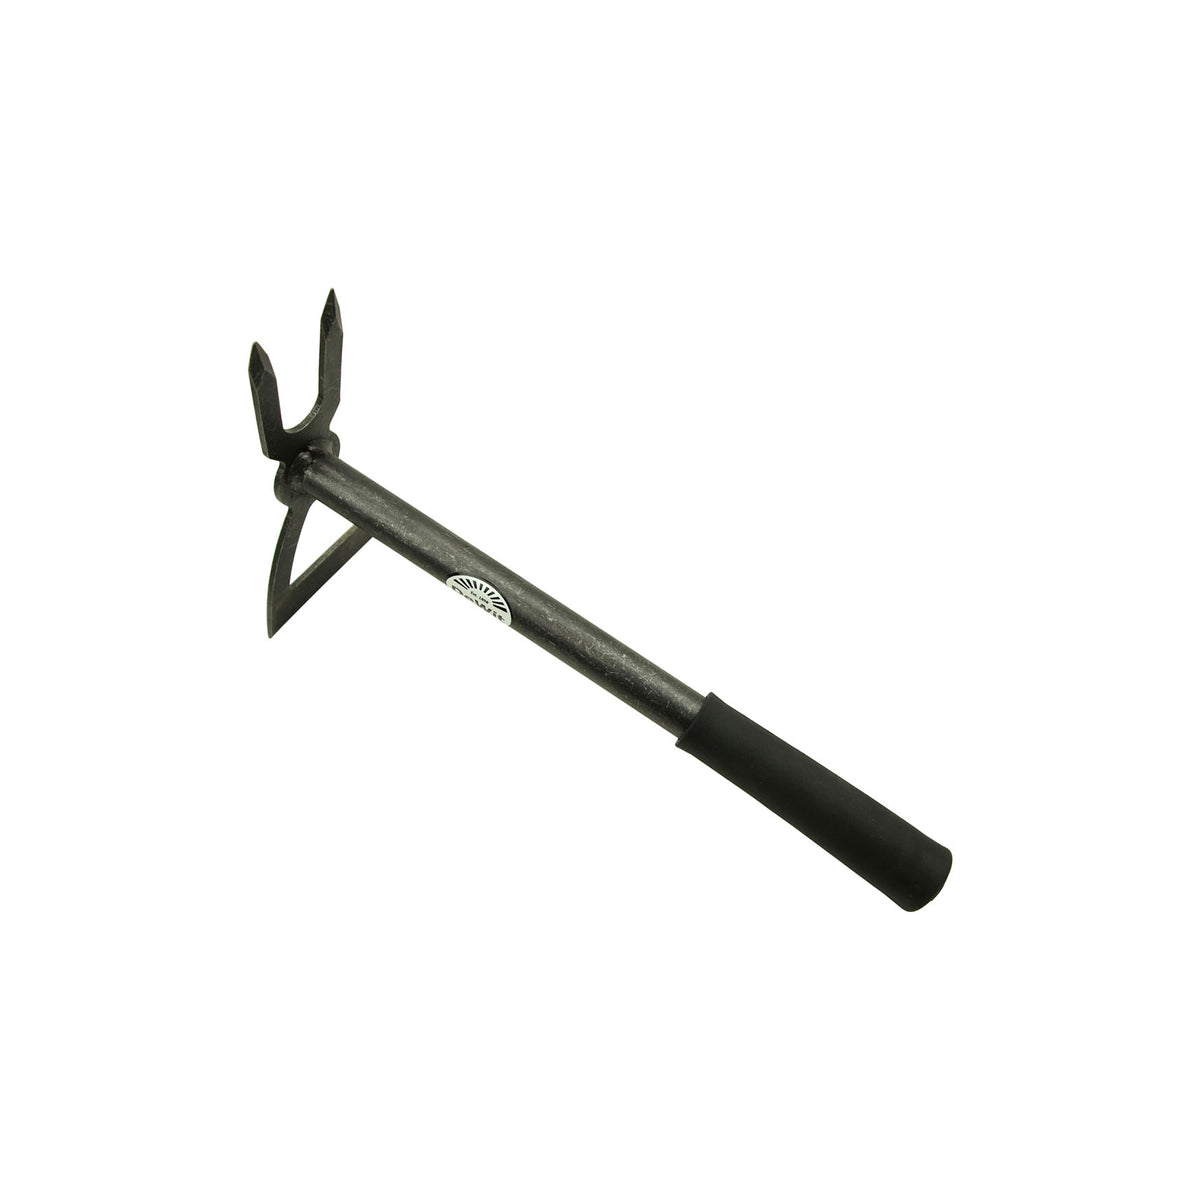 DeWit Comby Hoe - 2 Tine Cultivator /  Wide Edge Chopping